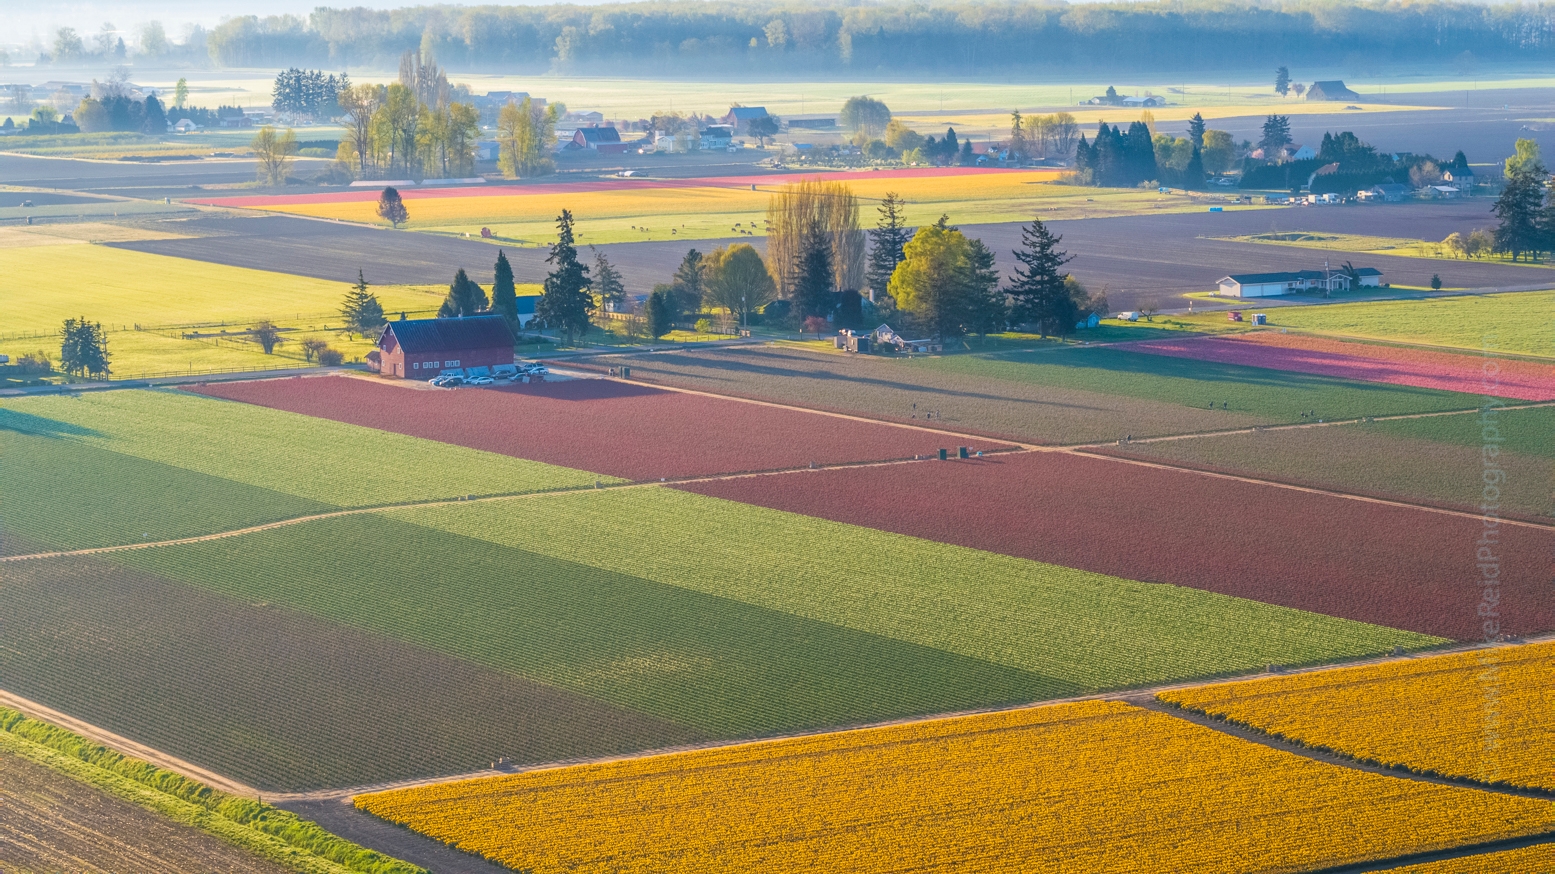 Over the Skagit Valley Tulip and Daffodil Fields